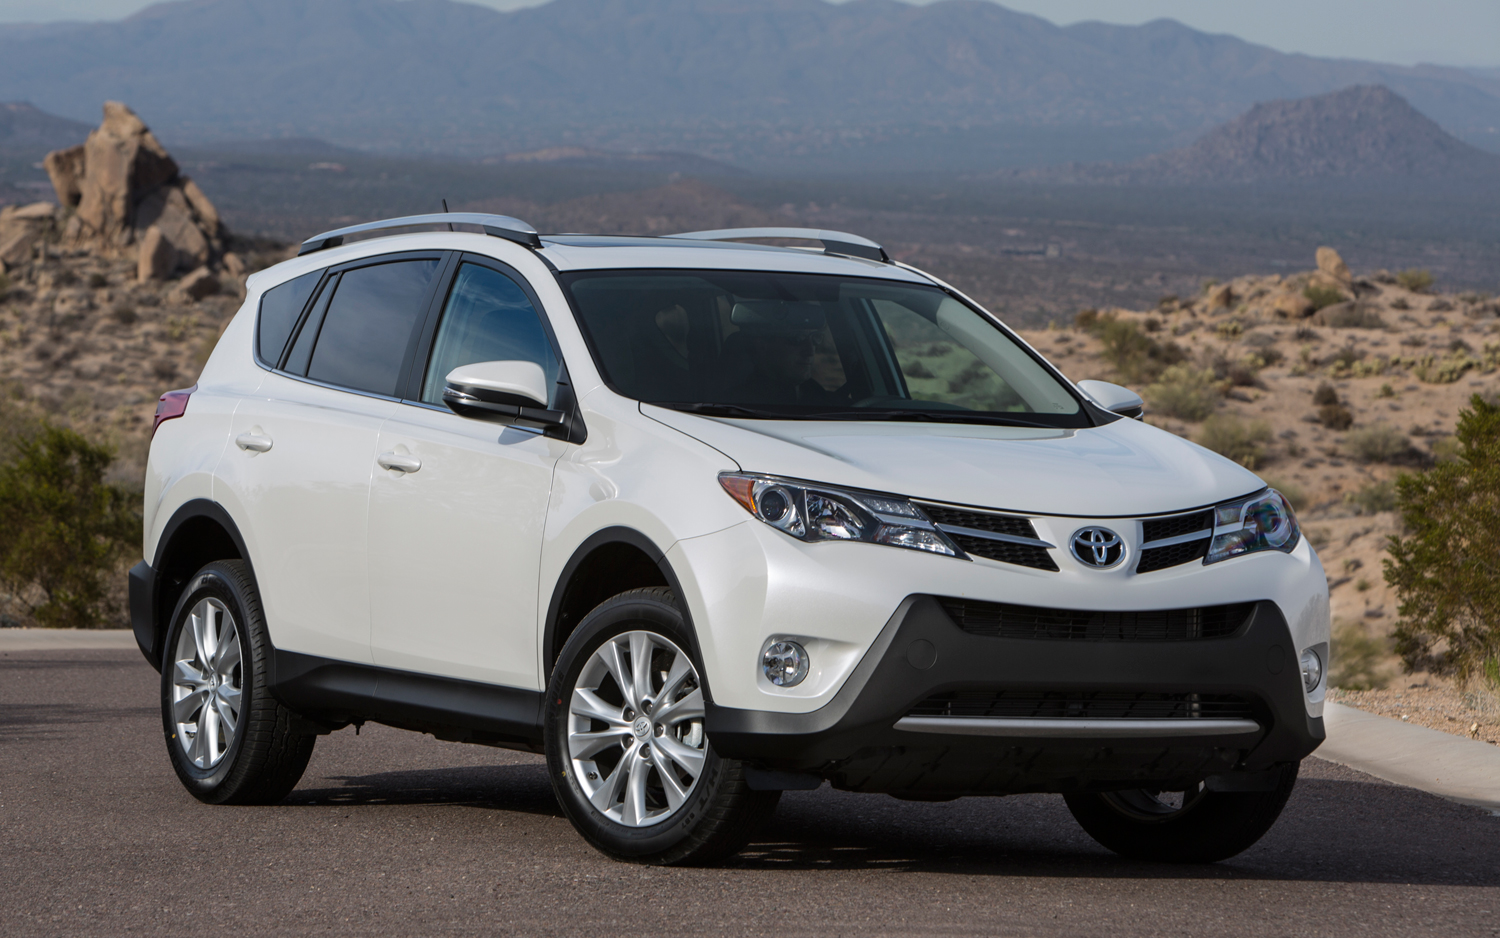 Most Wanted Cars: Toyota RAV4 2013